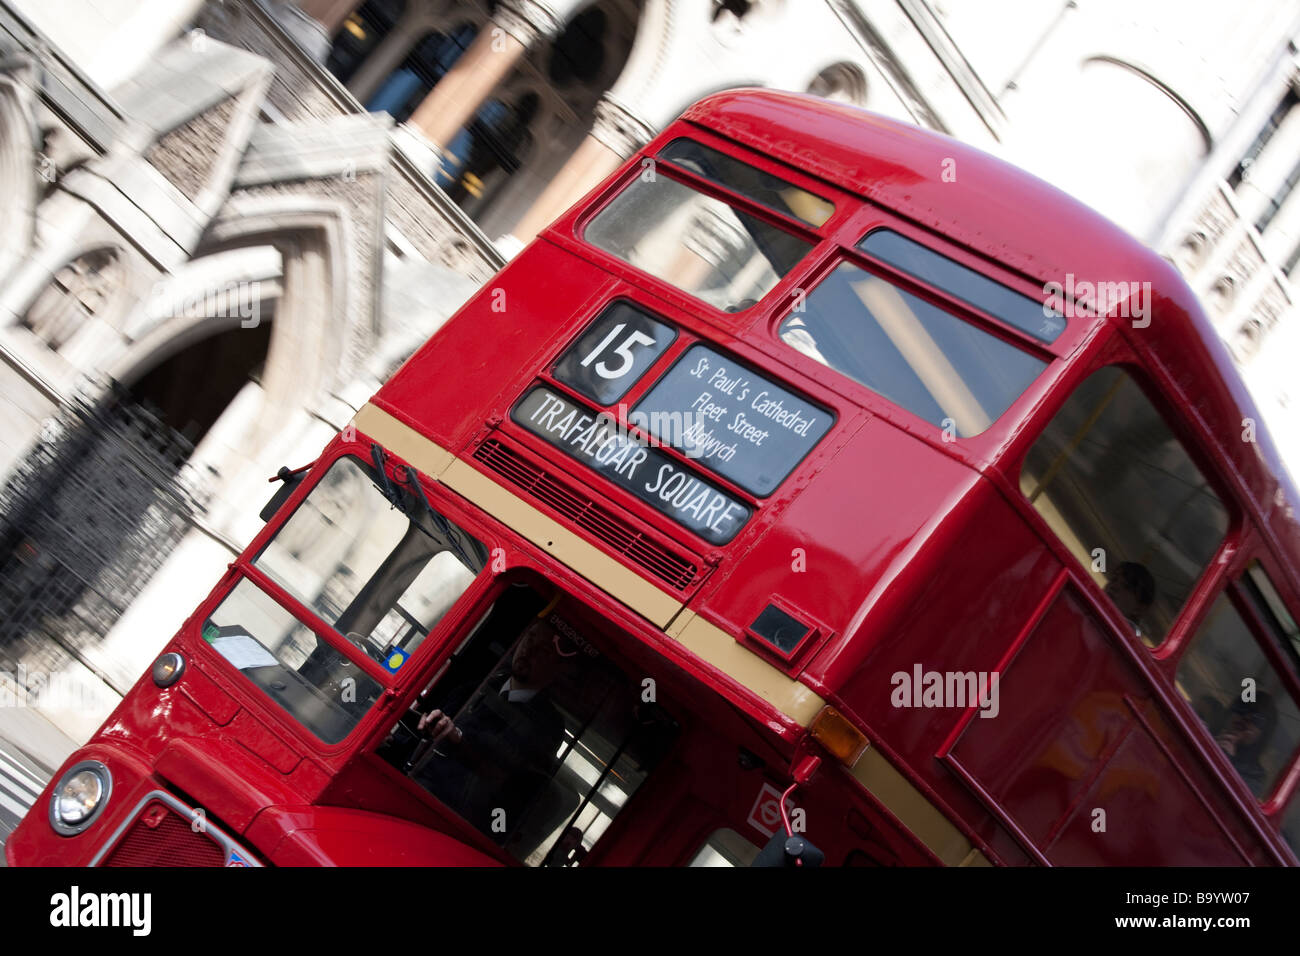 Number 15 routemaster bus Stock Photo